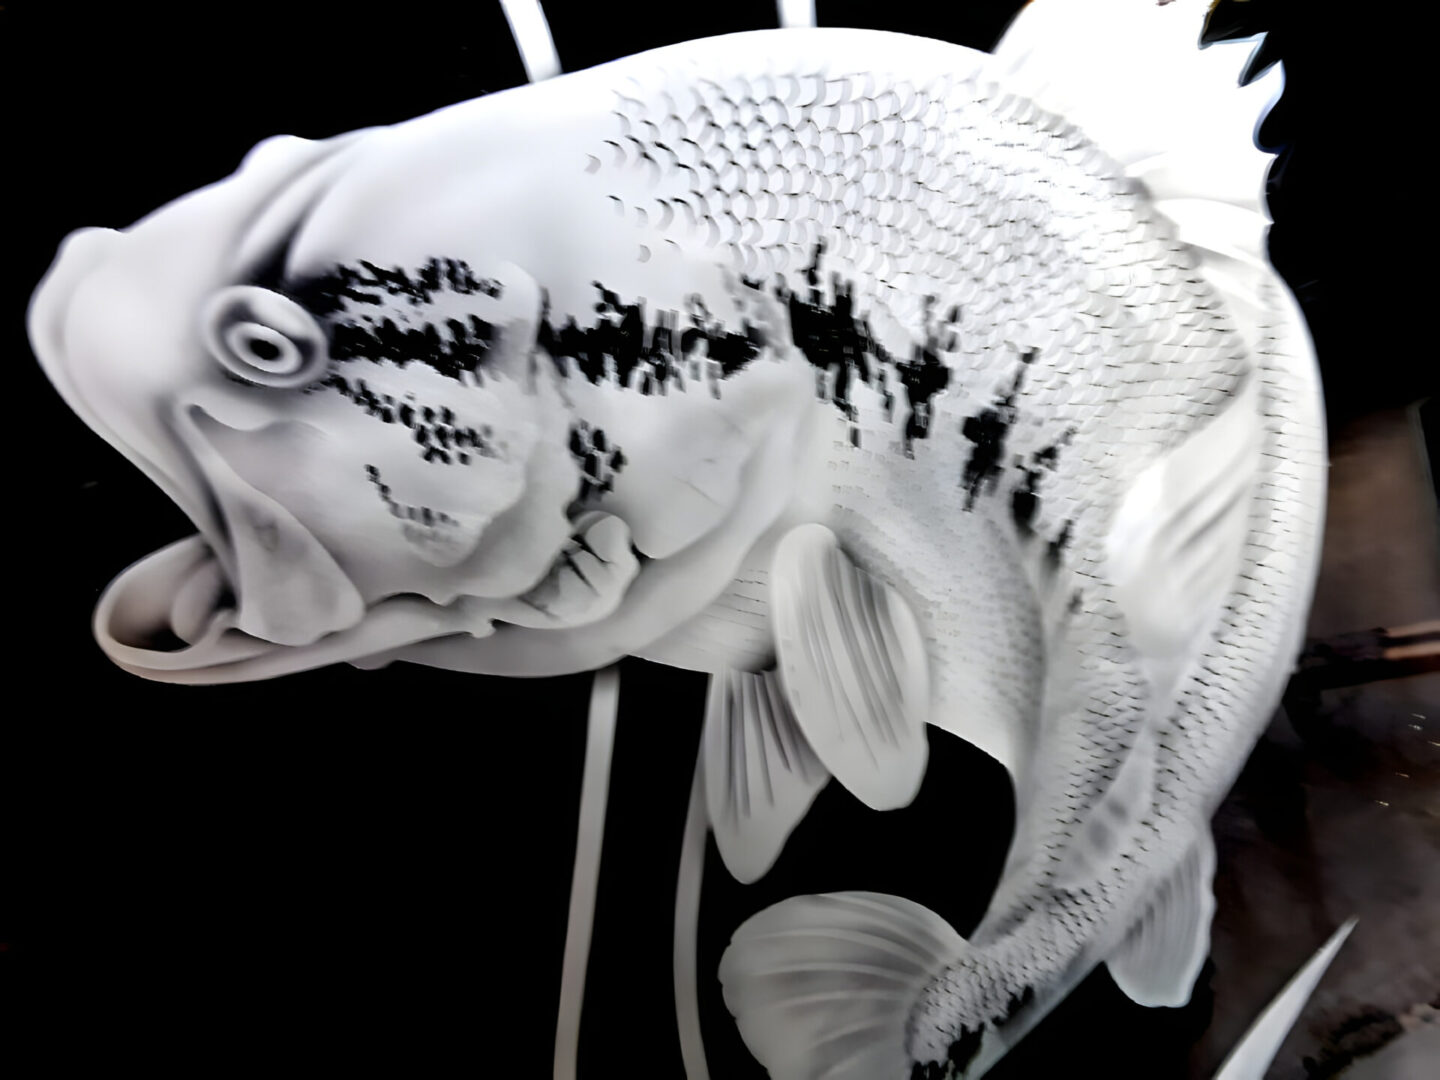 A close-up of a white and black koi fish sculpture with intricate scales and fins.